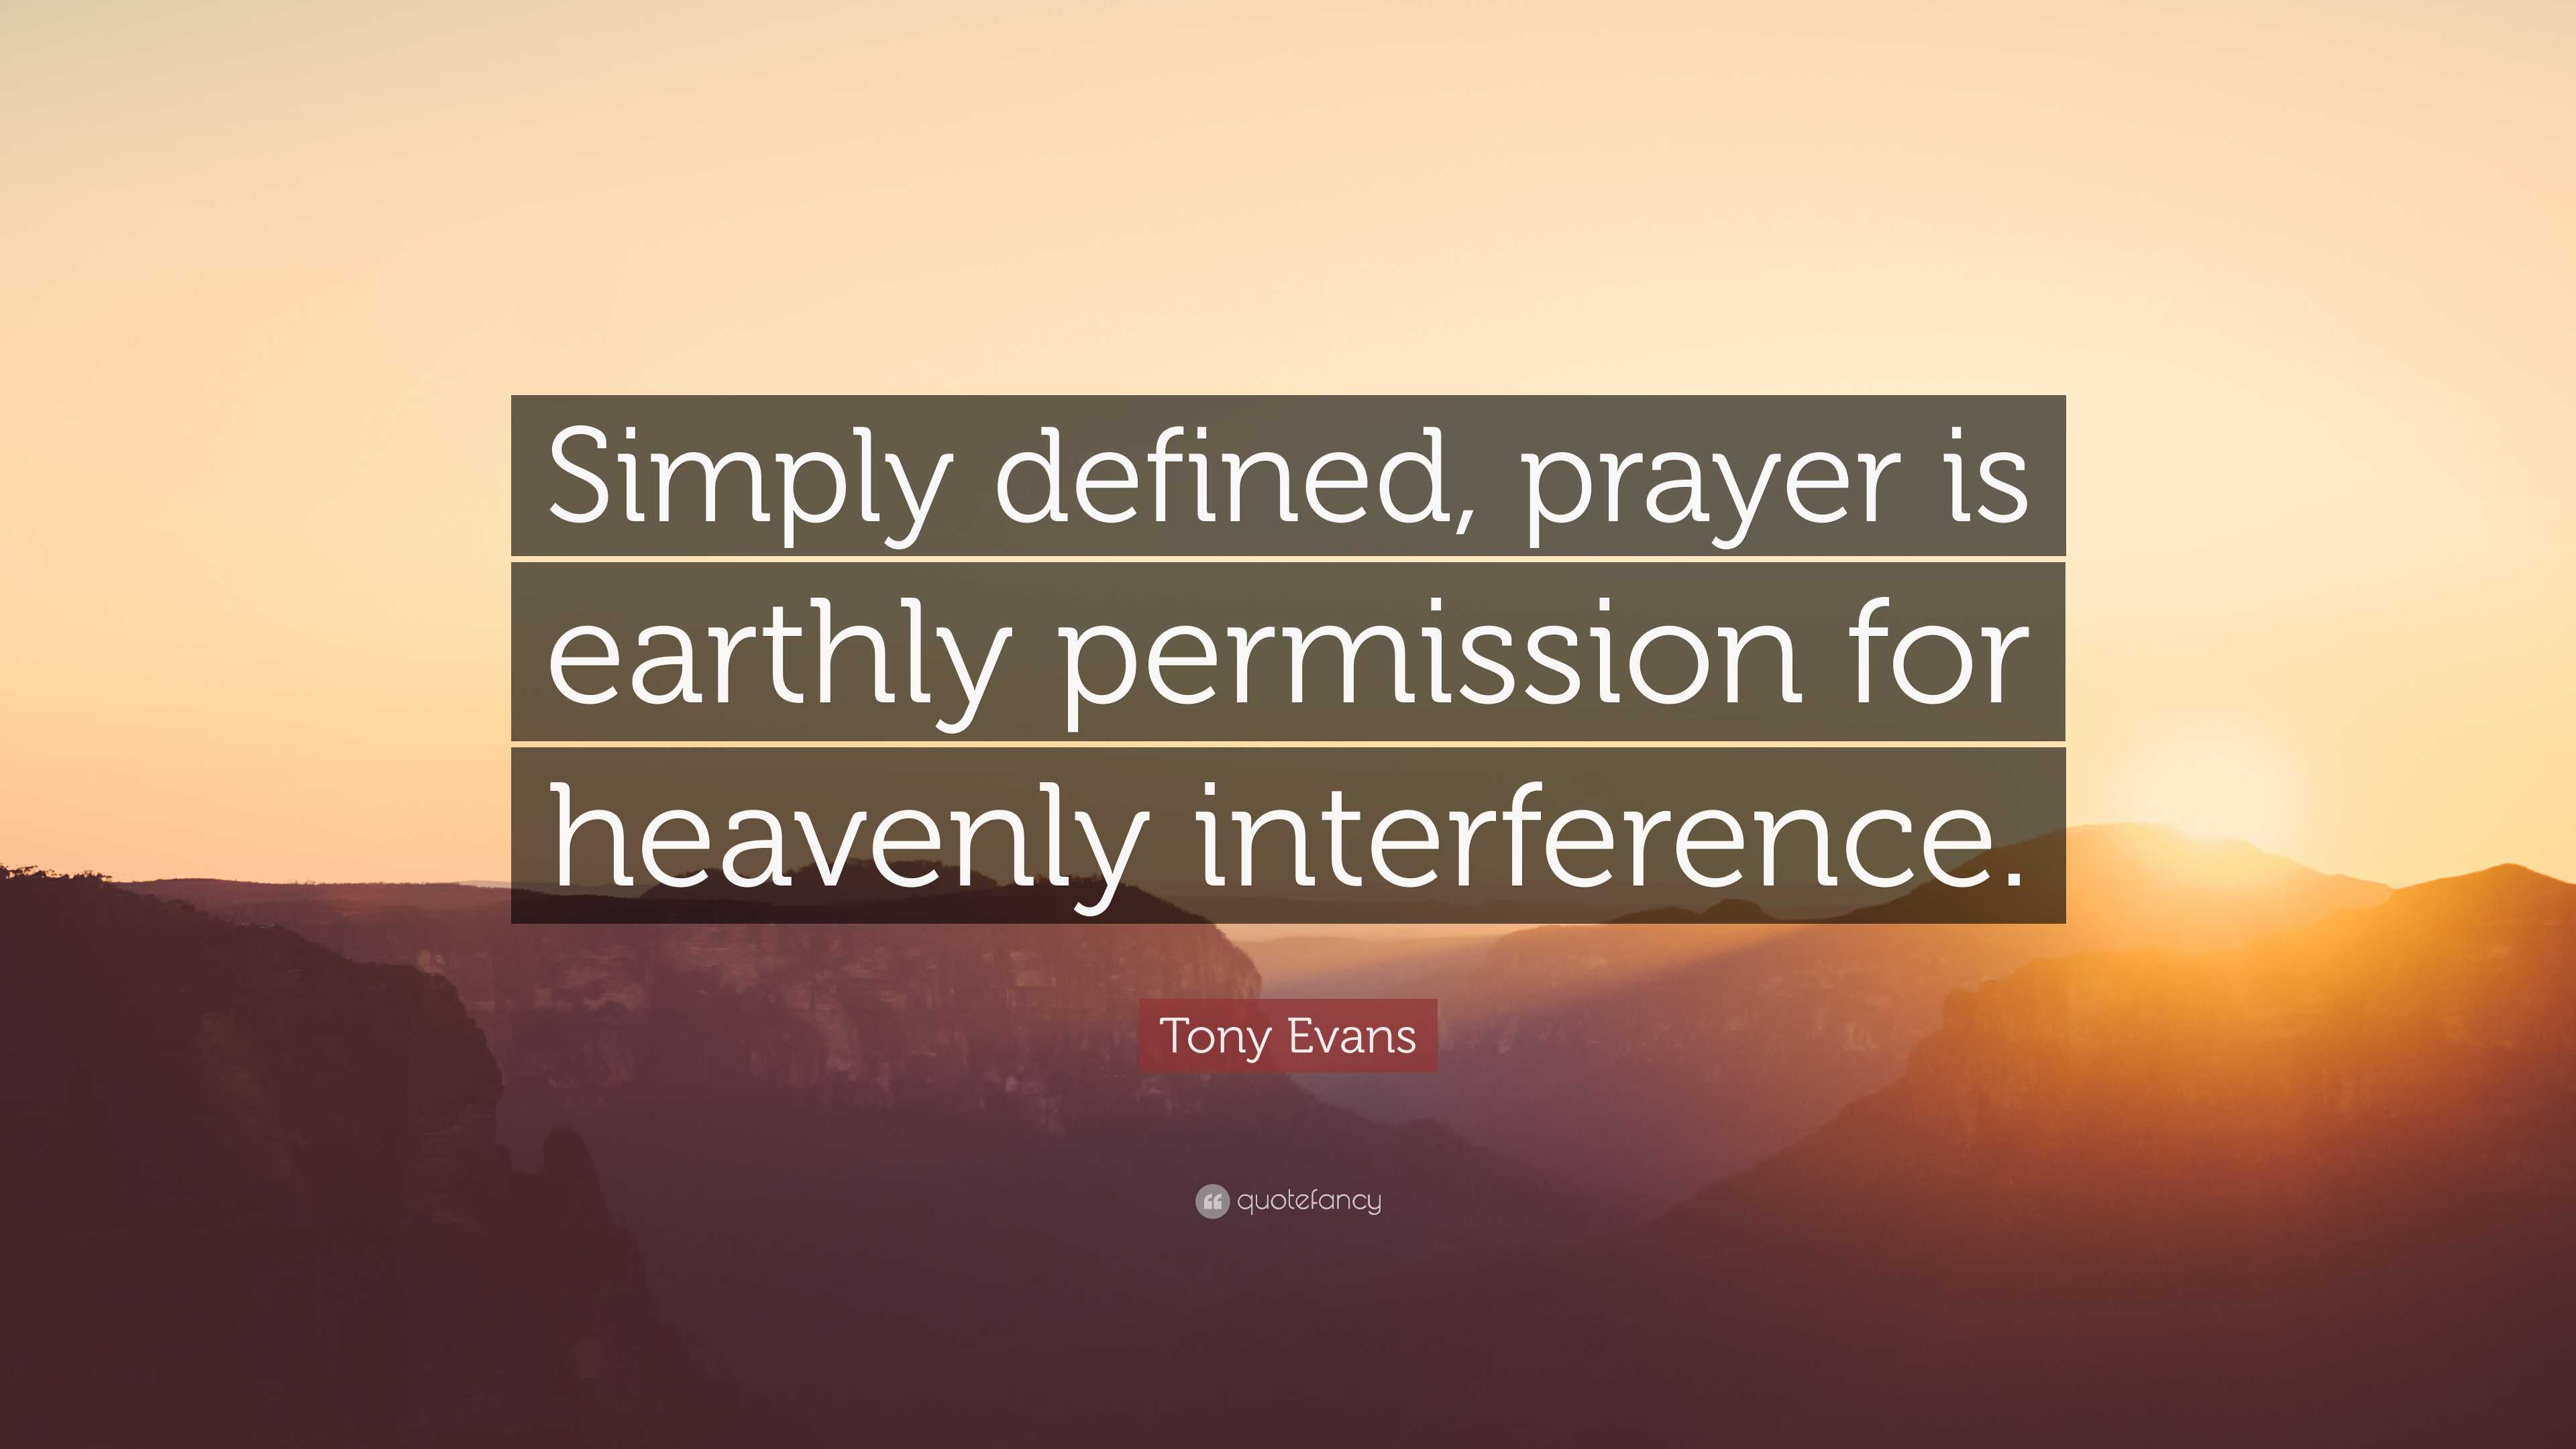 Tony Evans Quote: “Simply defined, prayer is earthly permission for ...